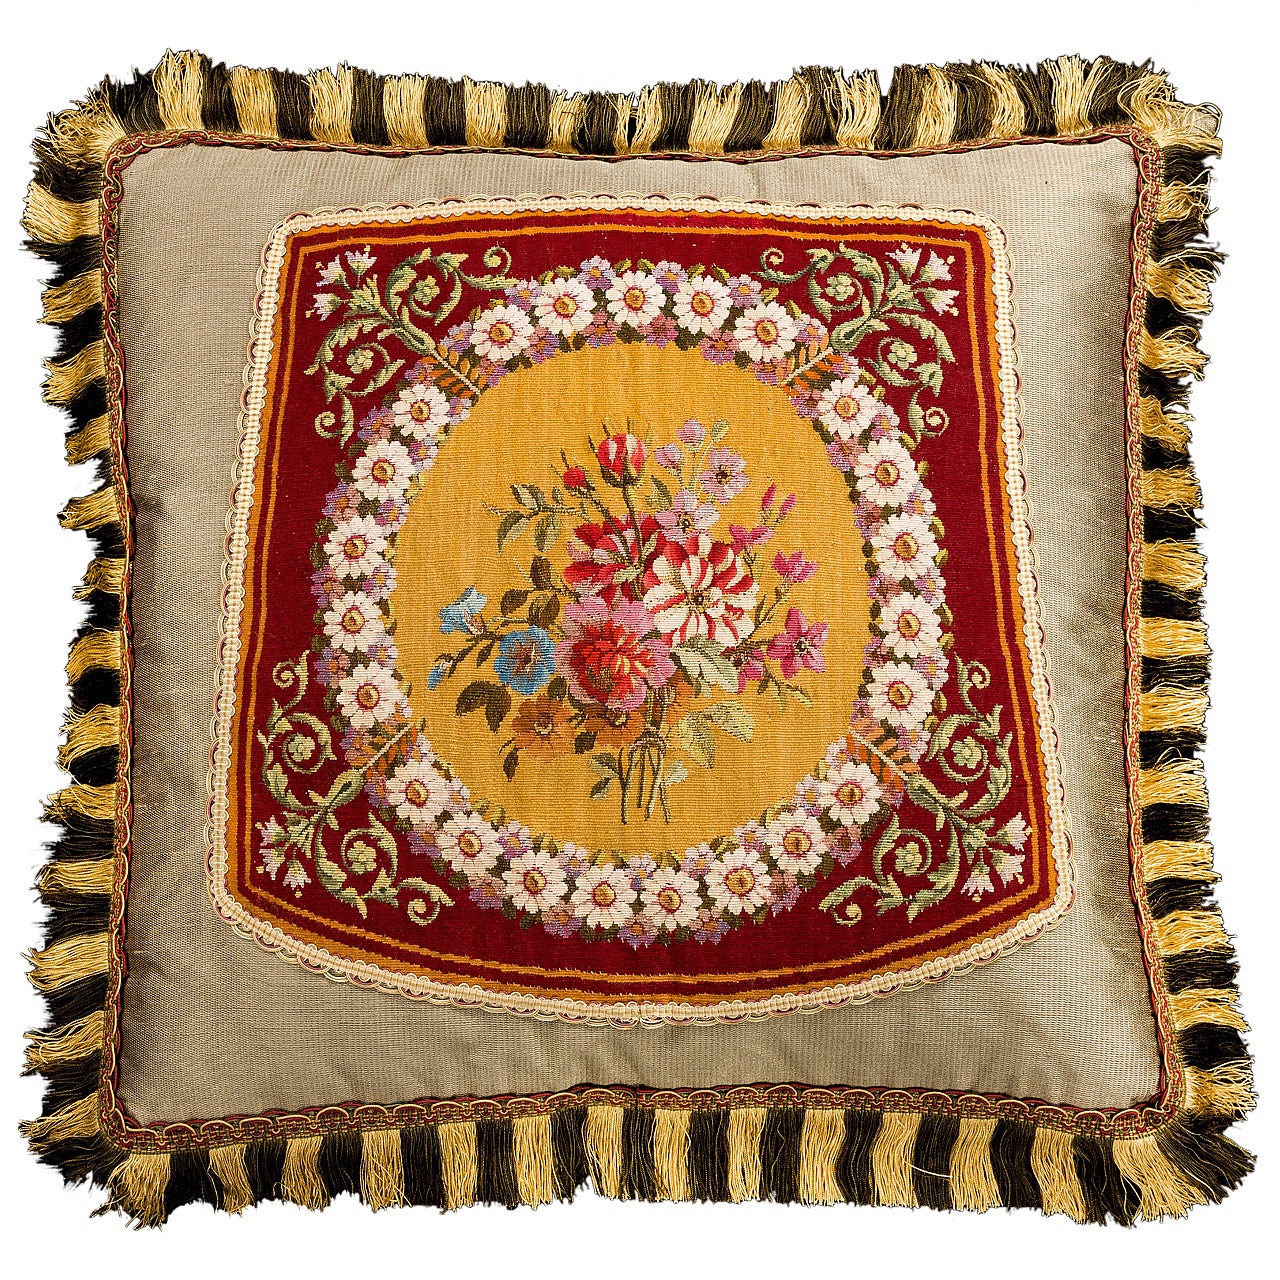 Cushion: 18th Century, Wool and Silk. A crown of flowers